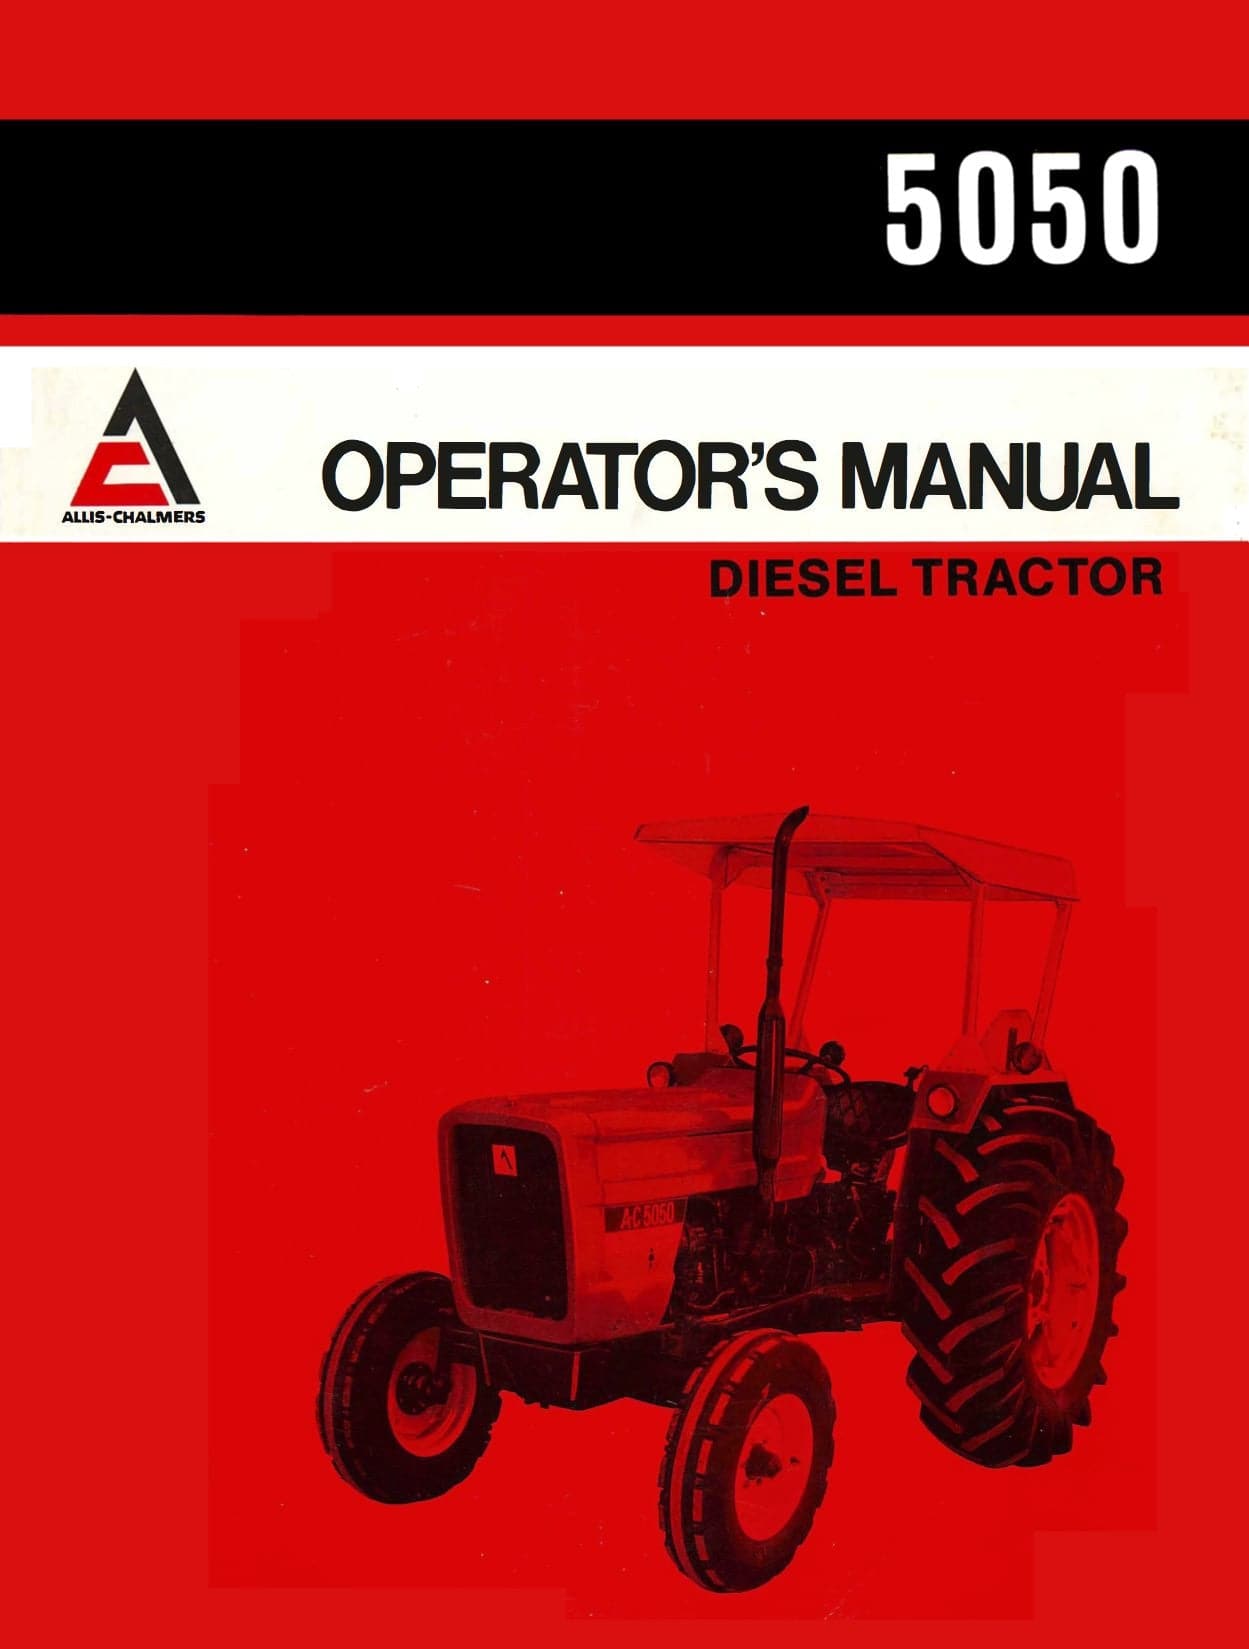 Allis-Chalmers 5050 Diesel Tractor - Operator's Manual - Ag Manuals - A Provider of Digital Farm Manuals - 1